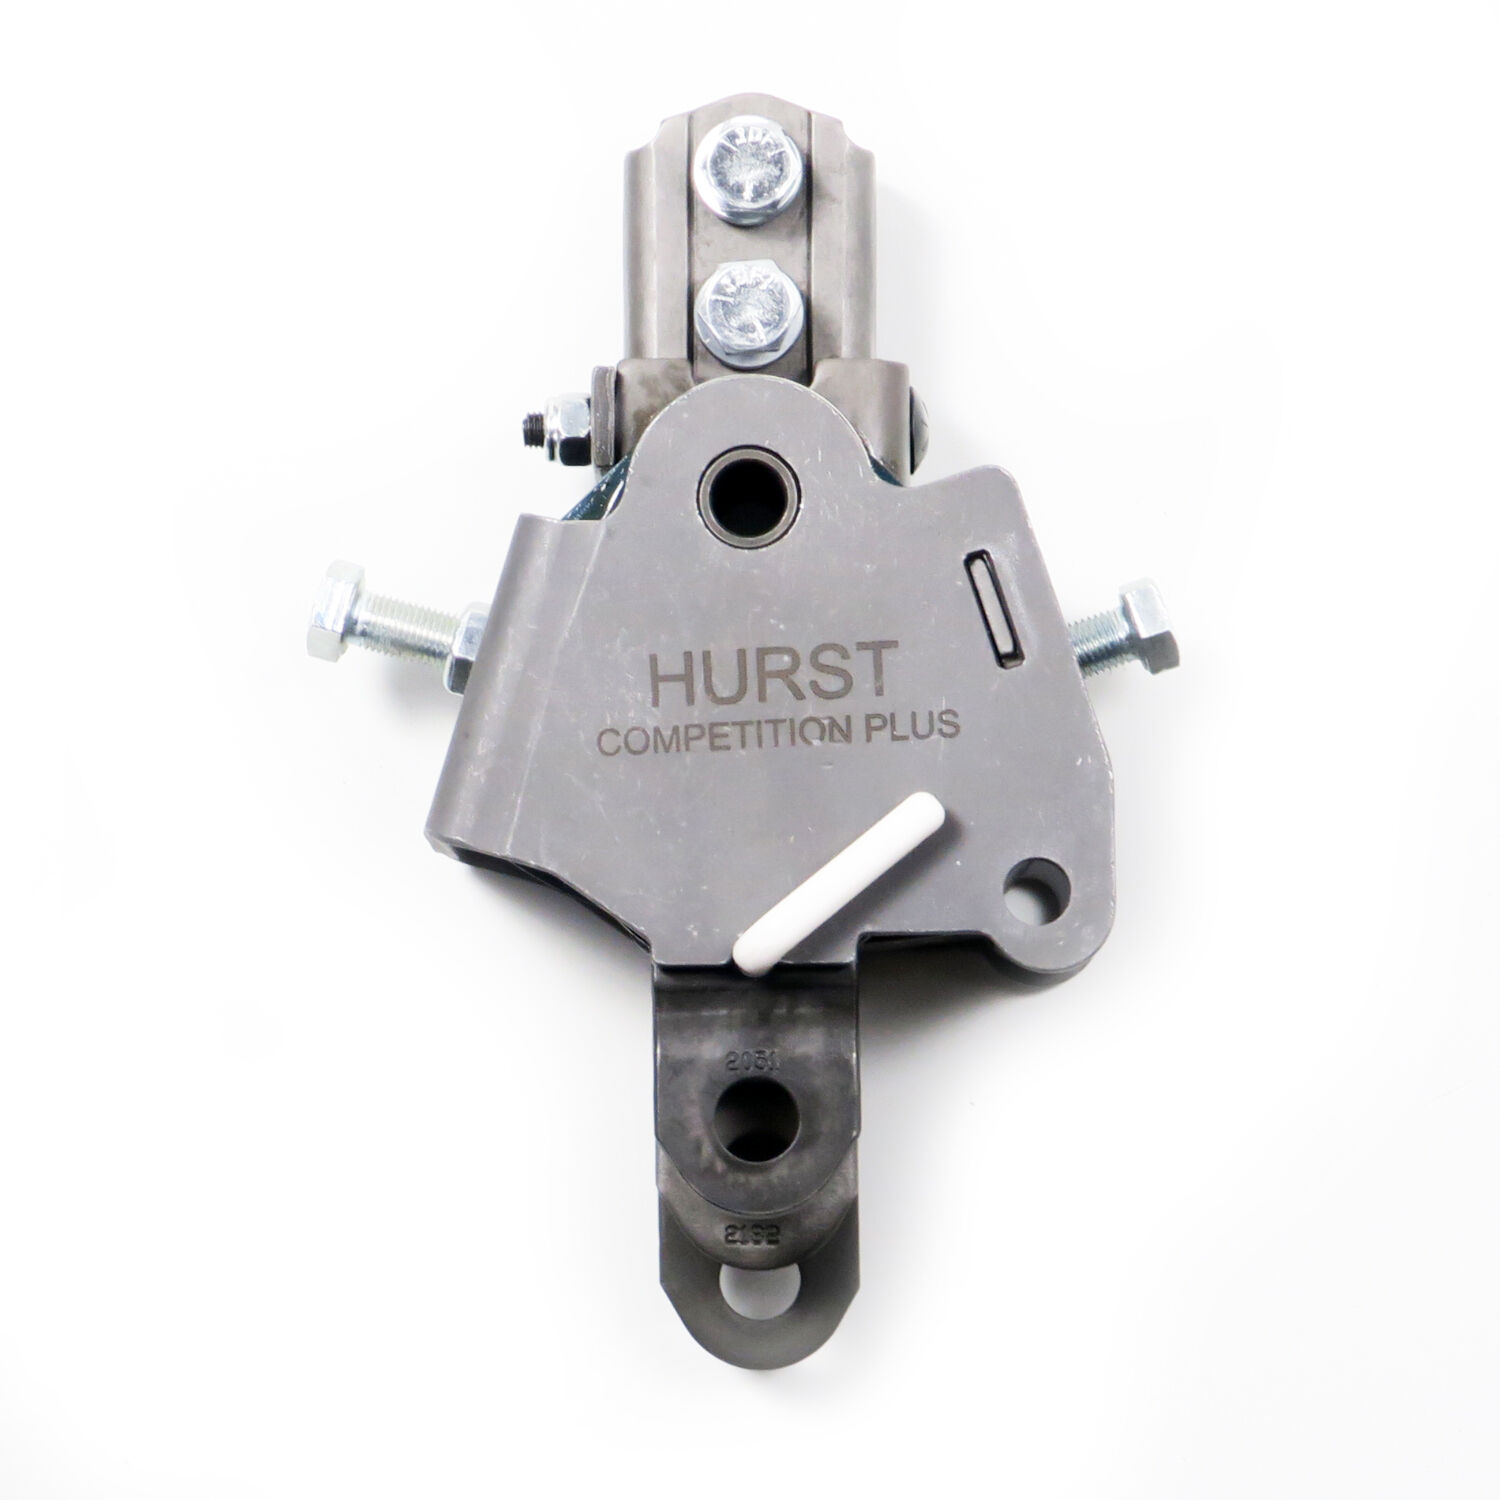 HURST 4 SPEED Competition Plus Shifter Mechanism 3915403 Many Chevy GM fitments